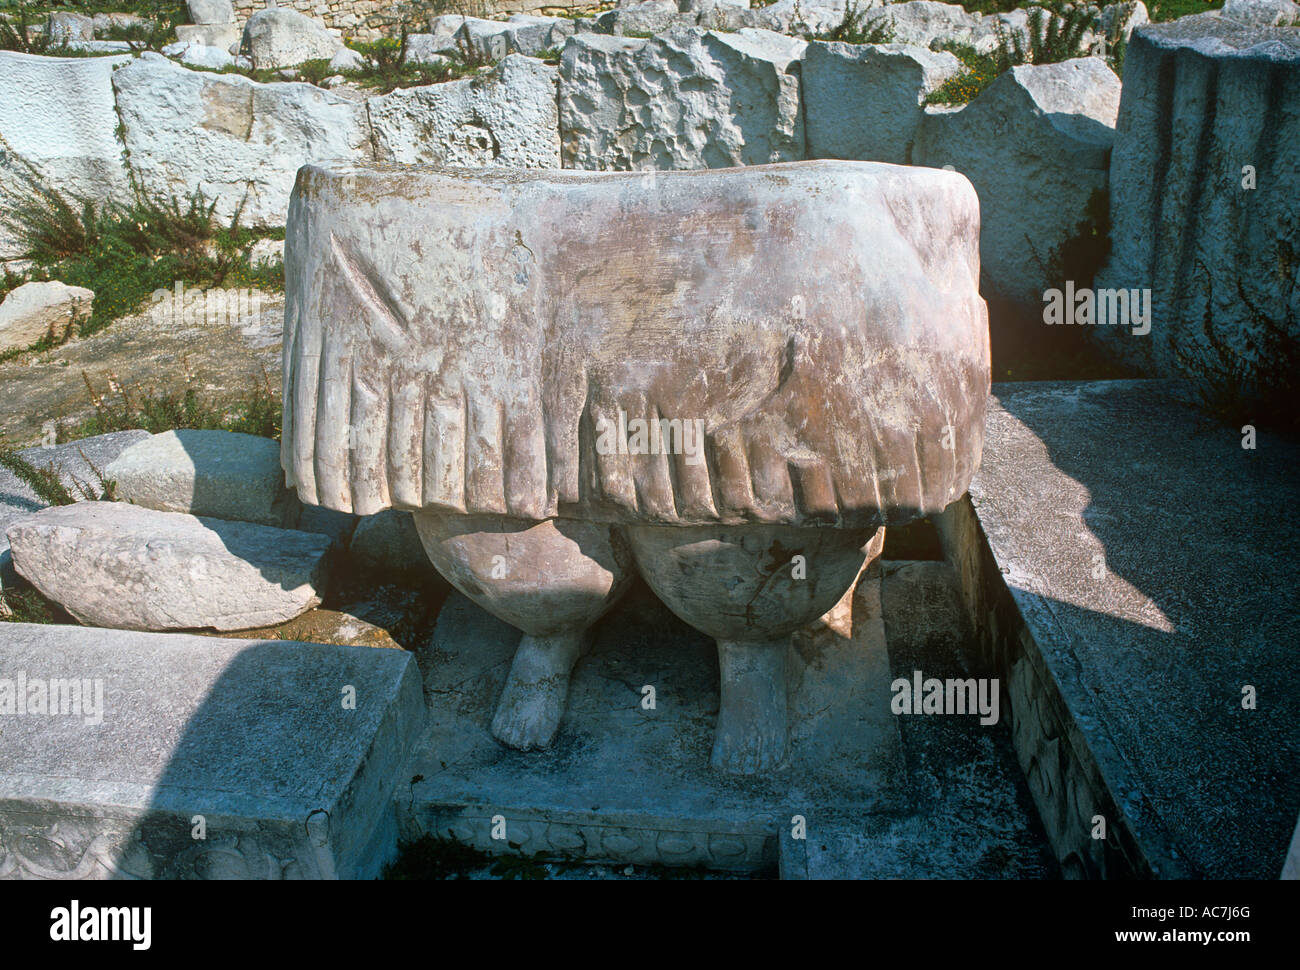 Goddess of Fertility large carved stone figure in the ruins of the Tarxien Temple Malta circa 2400 BC Stock Photo